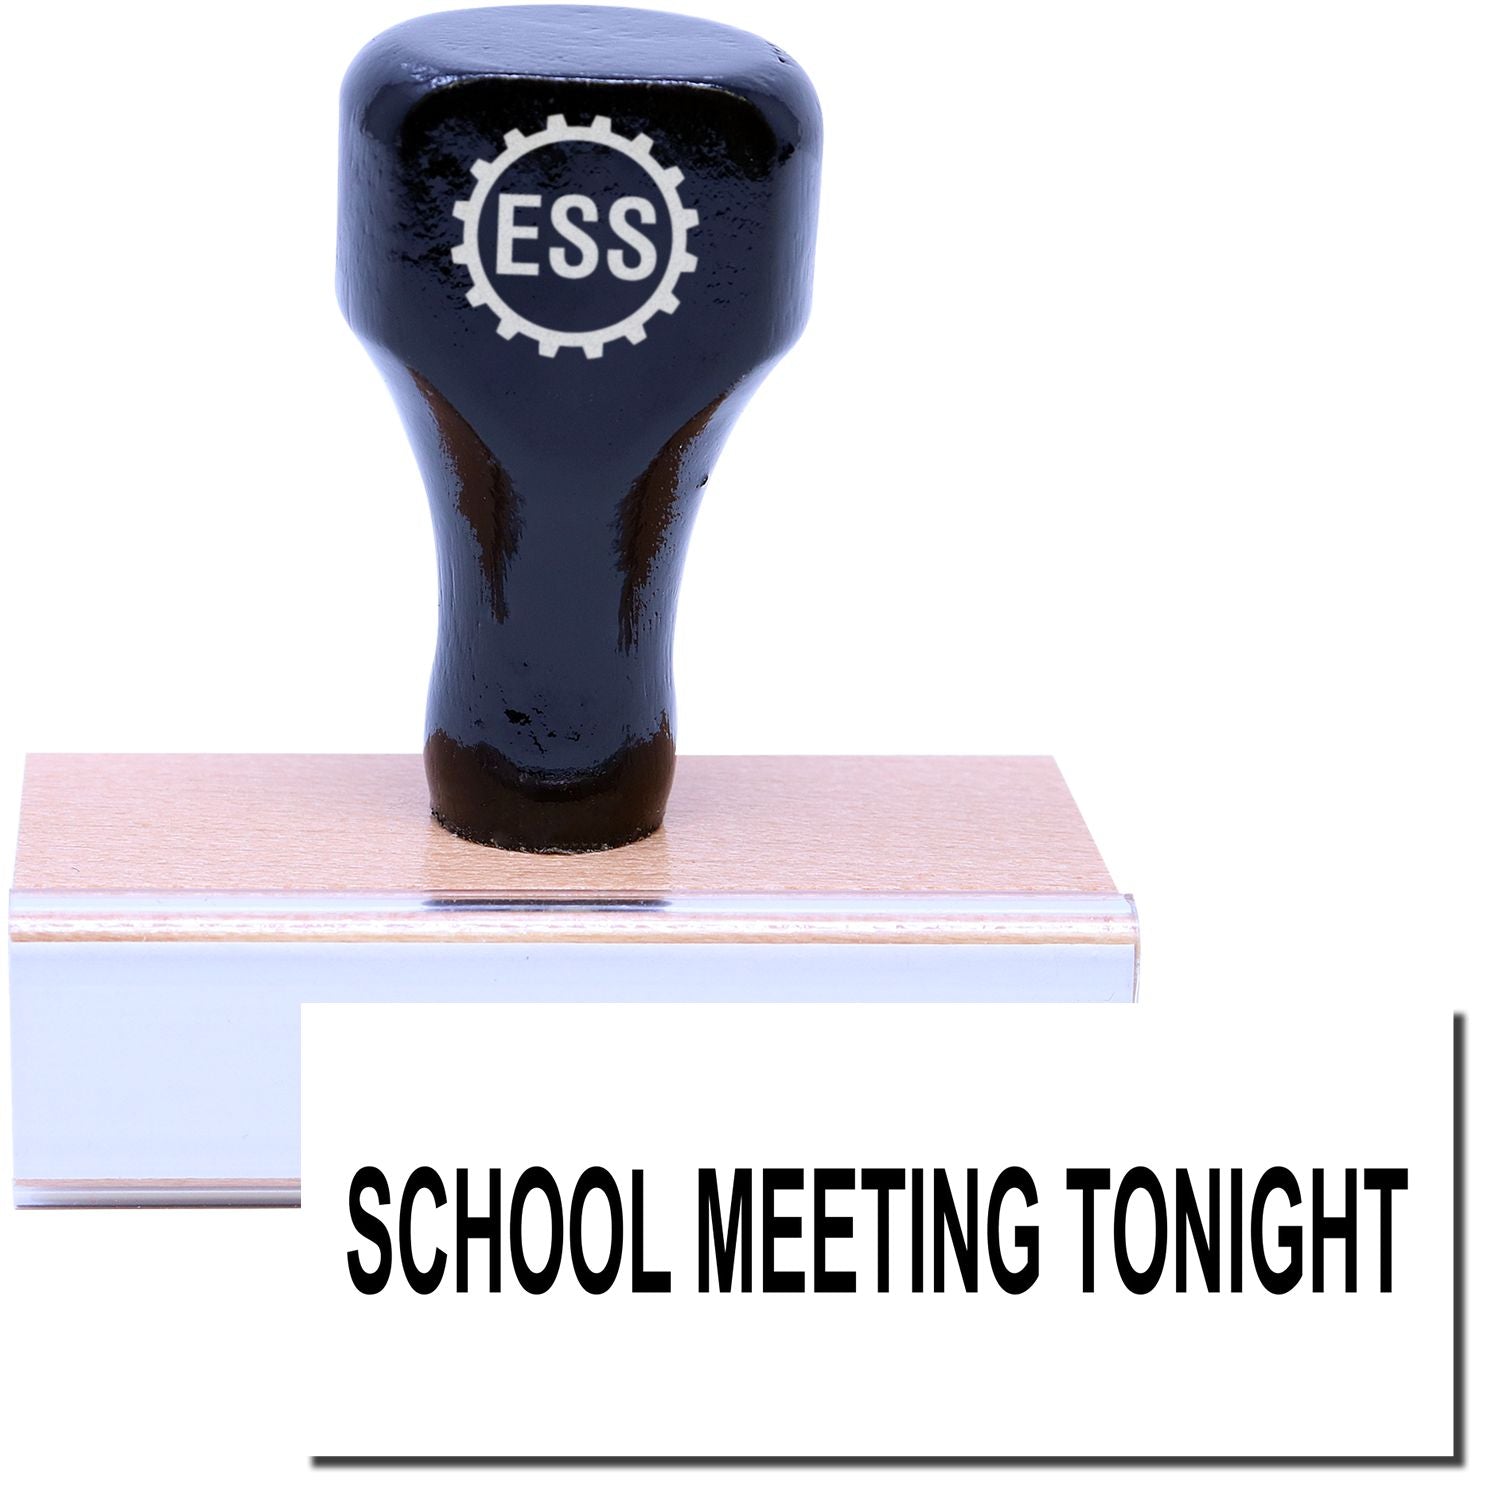 A stock office rubber stamp with a stamped image showing how the text "SCHOOL MEETING TONIGHT" in a large font is displayed after stamping.